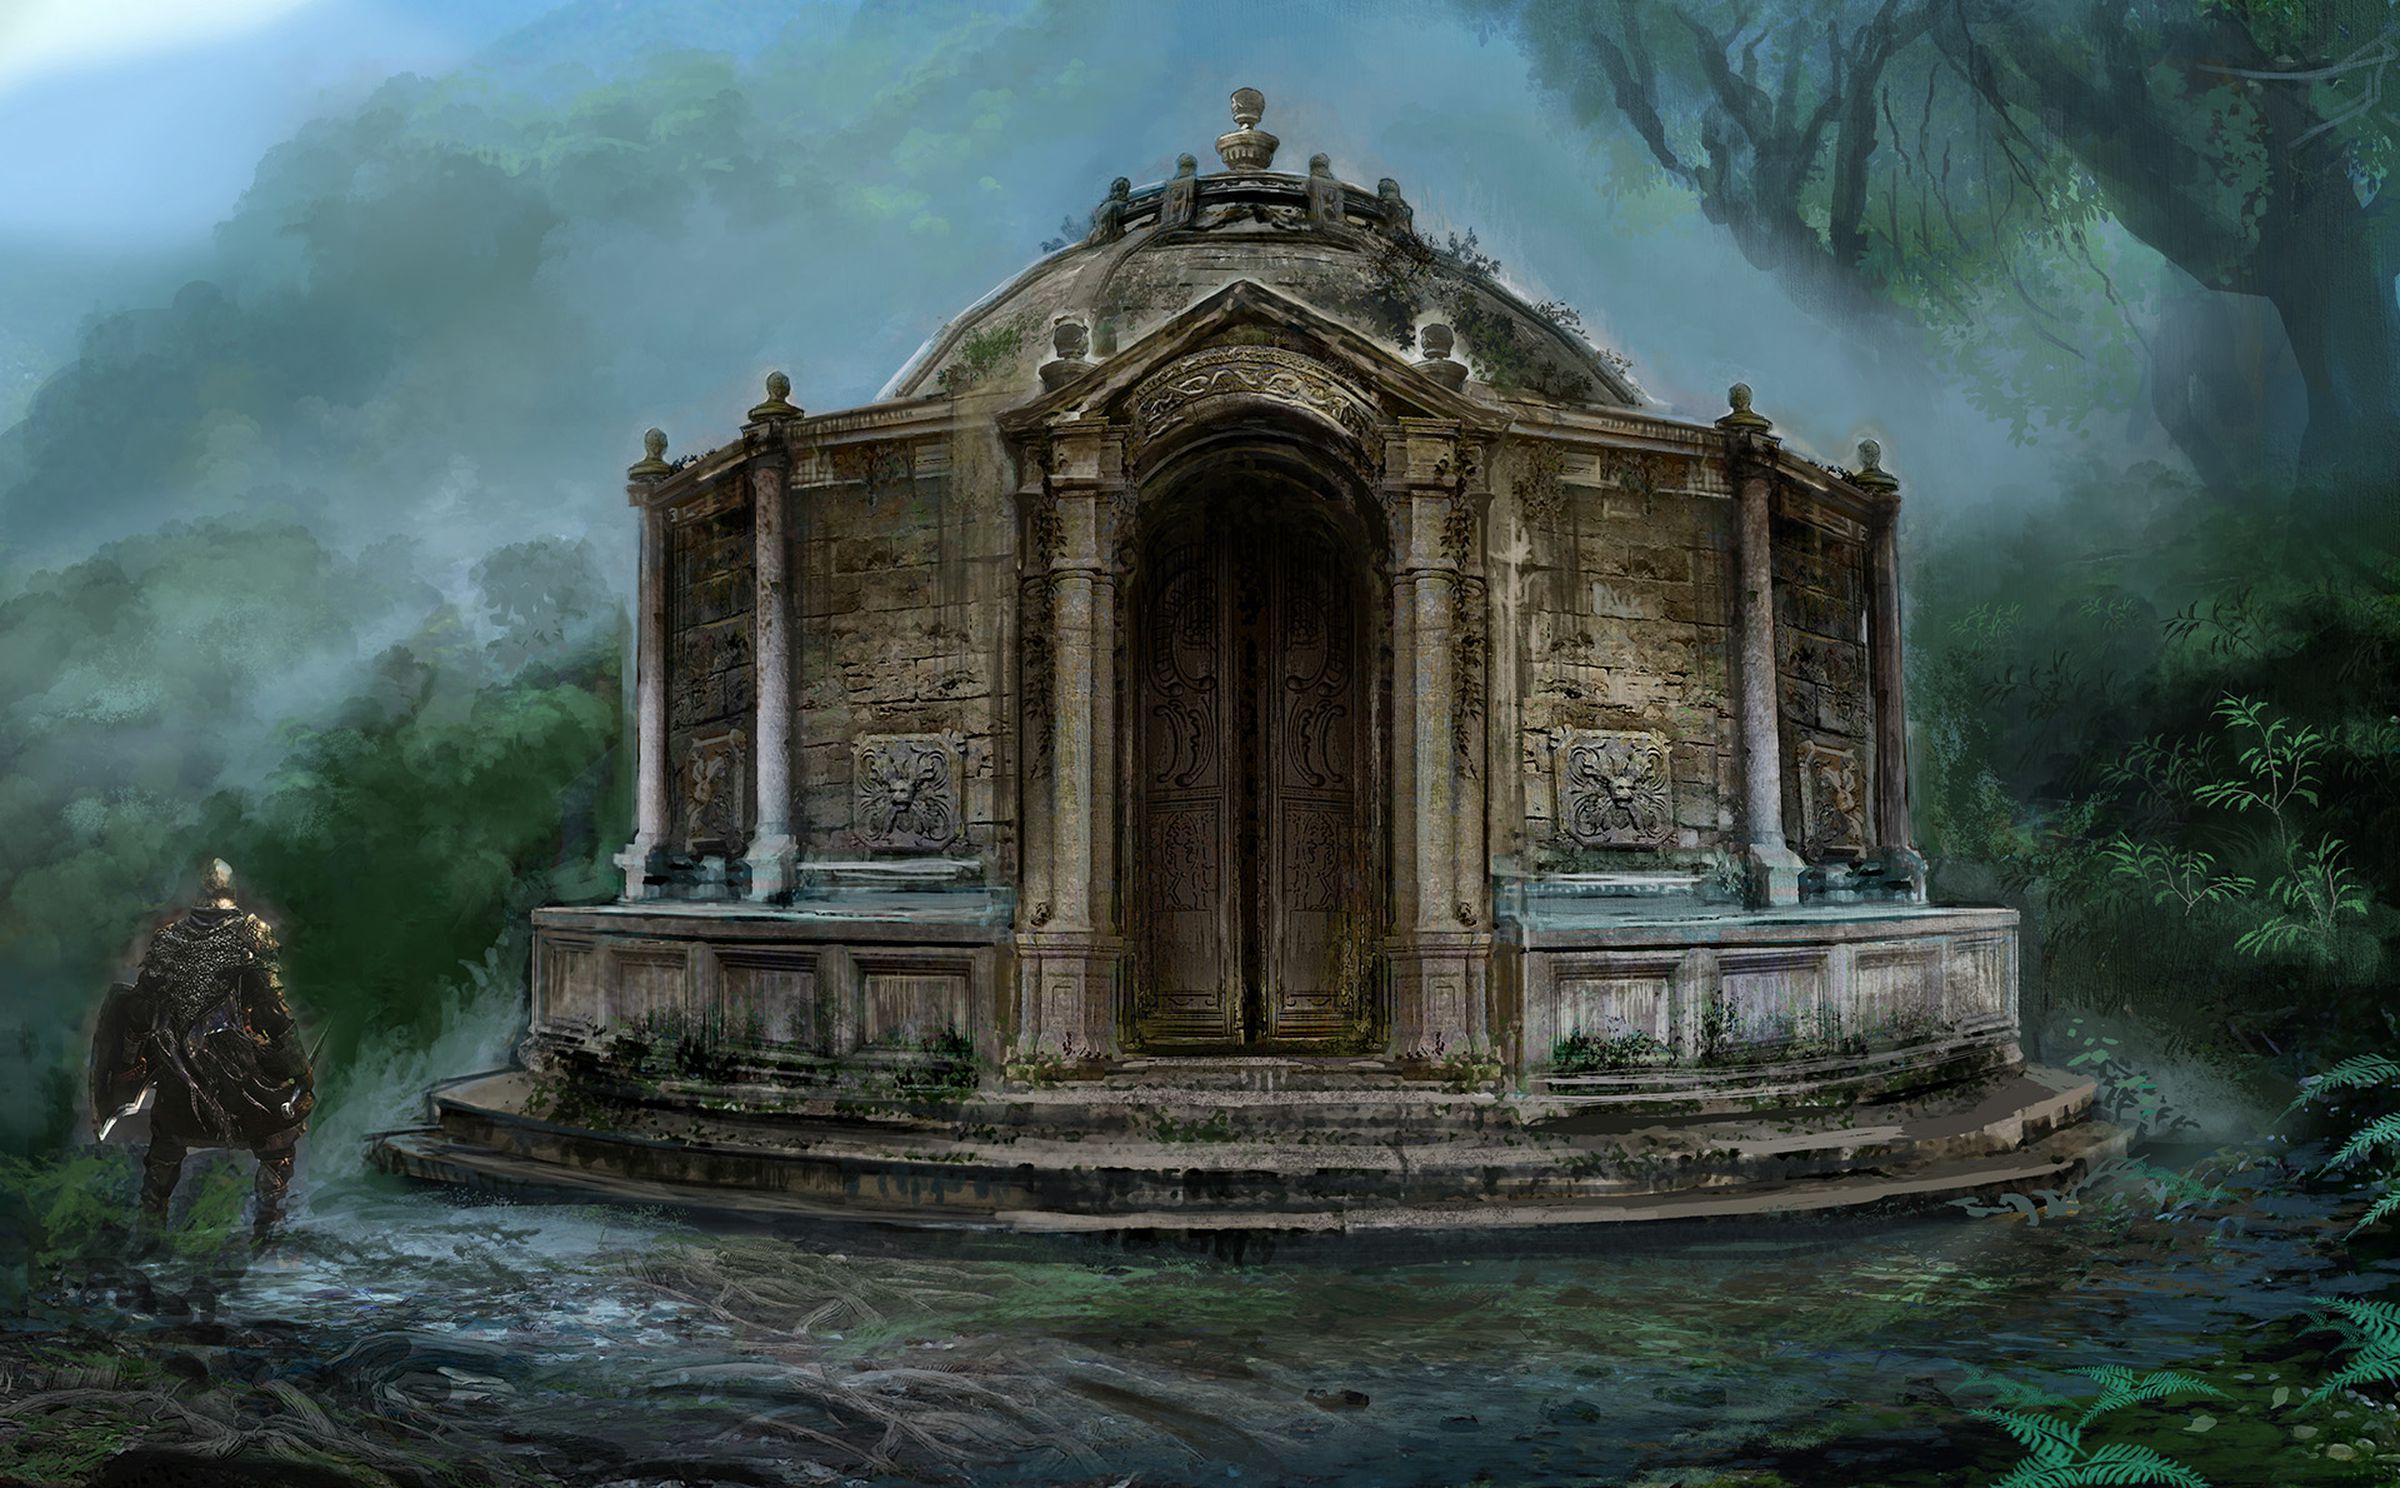 Art of a lift in the video game Elden Ring.